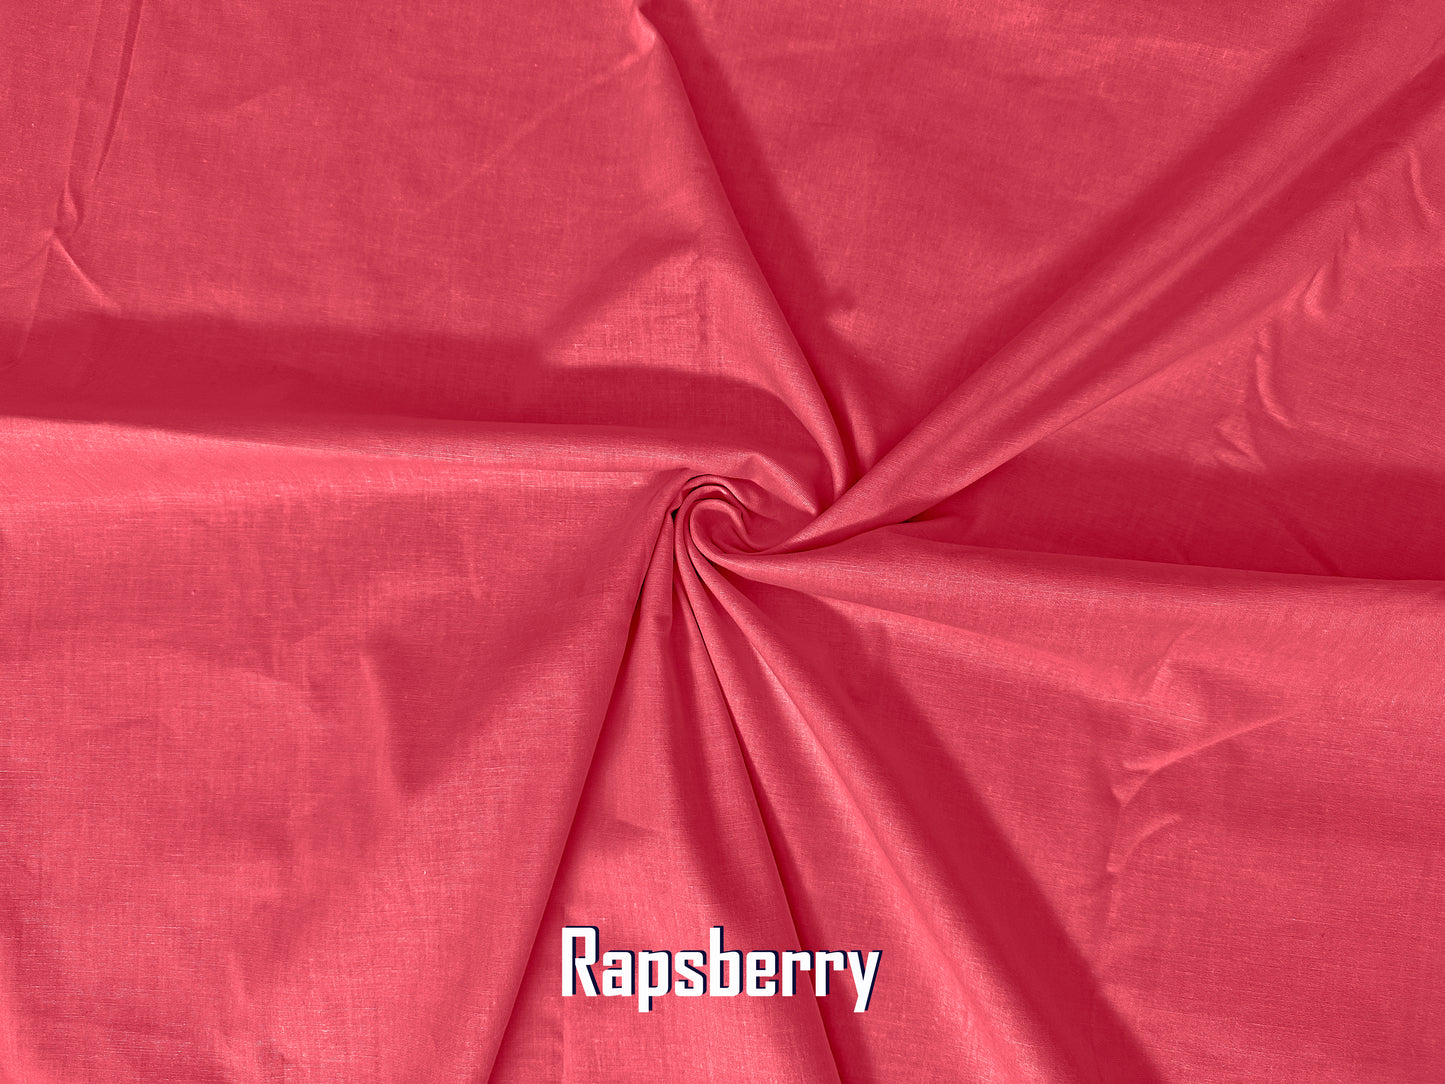 Woven Cotton Poplin Fabric-Raspberry Solid Color-WnCP002-Sold by the Bulk